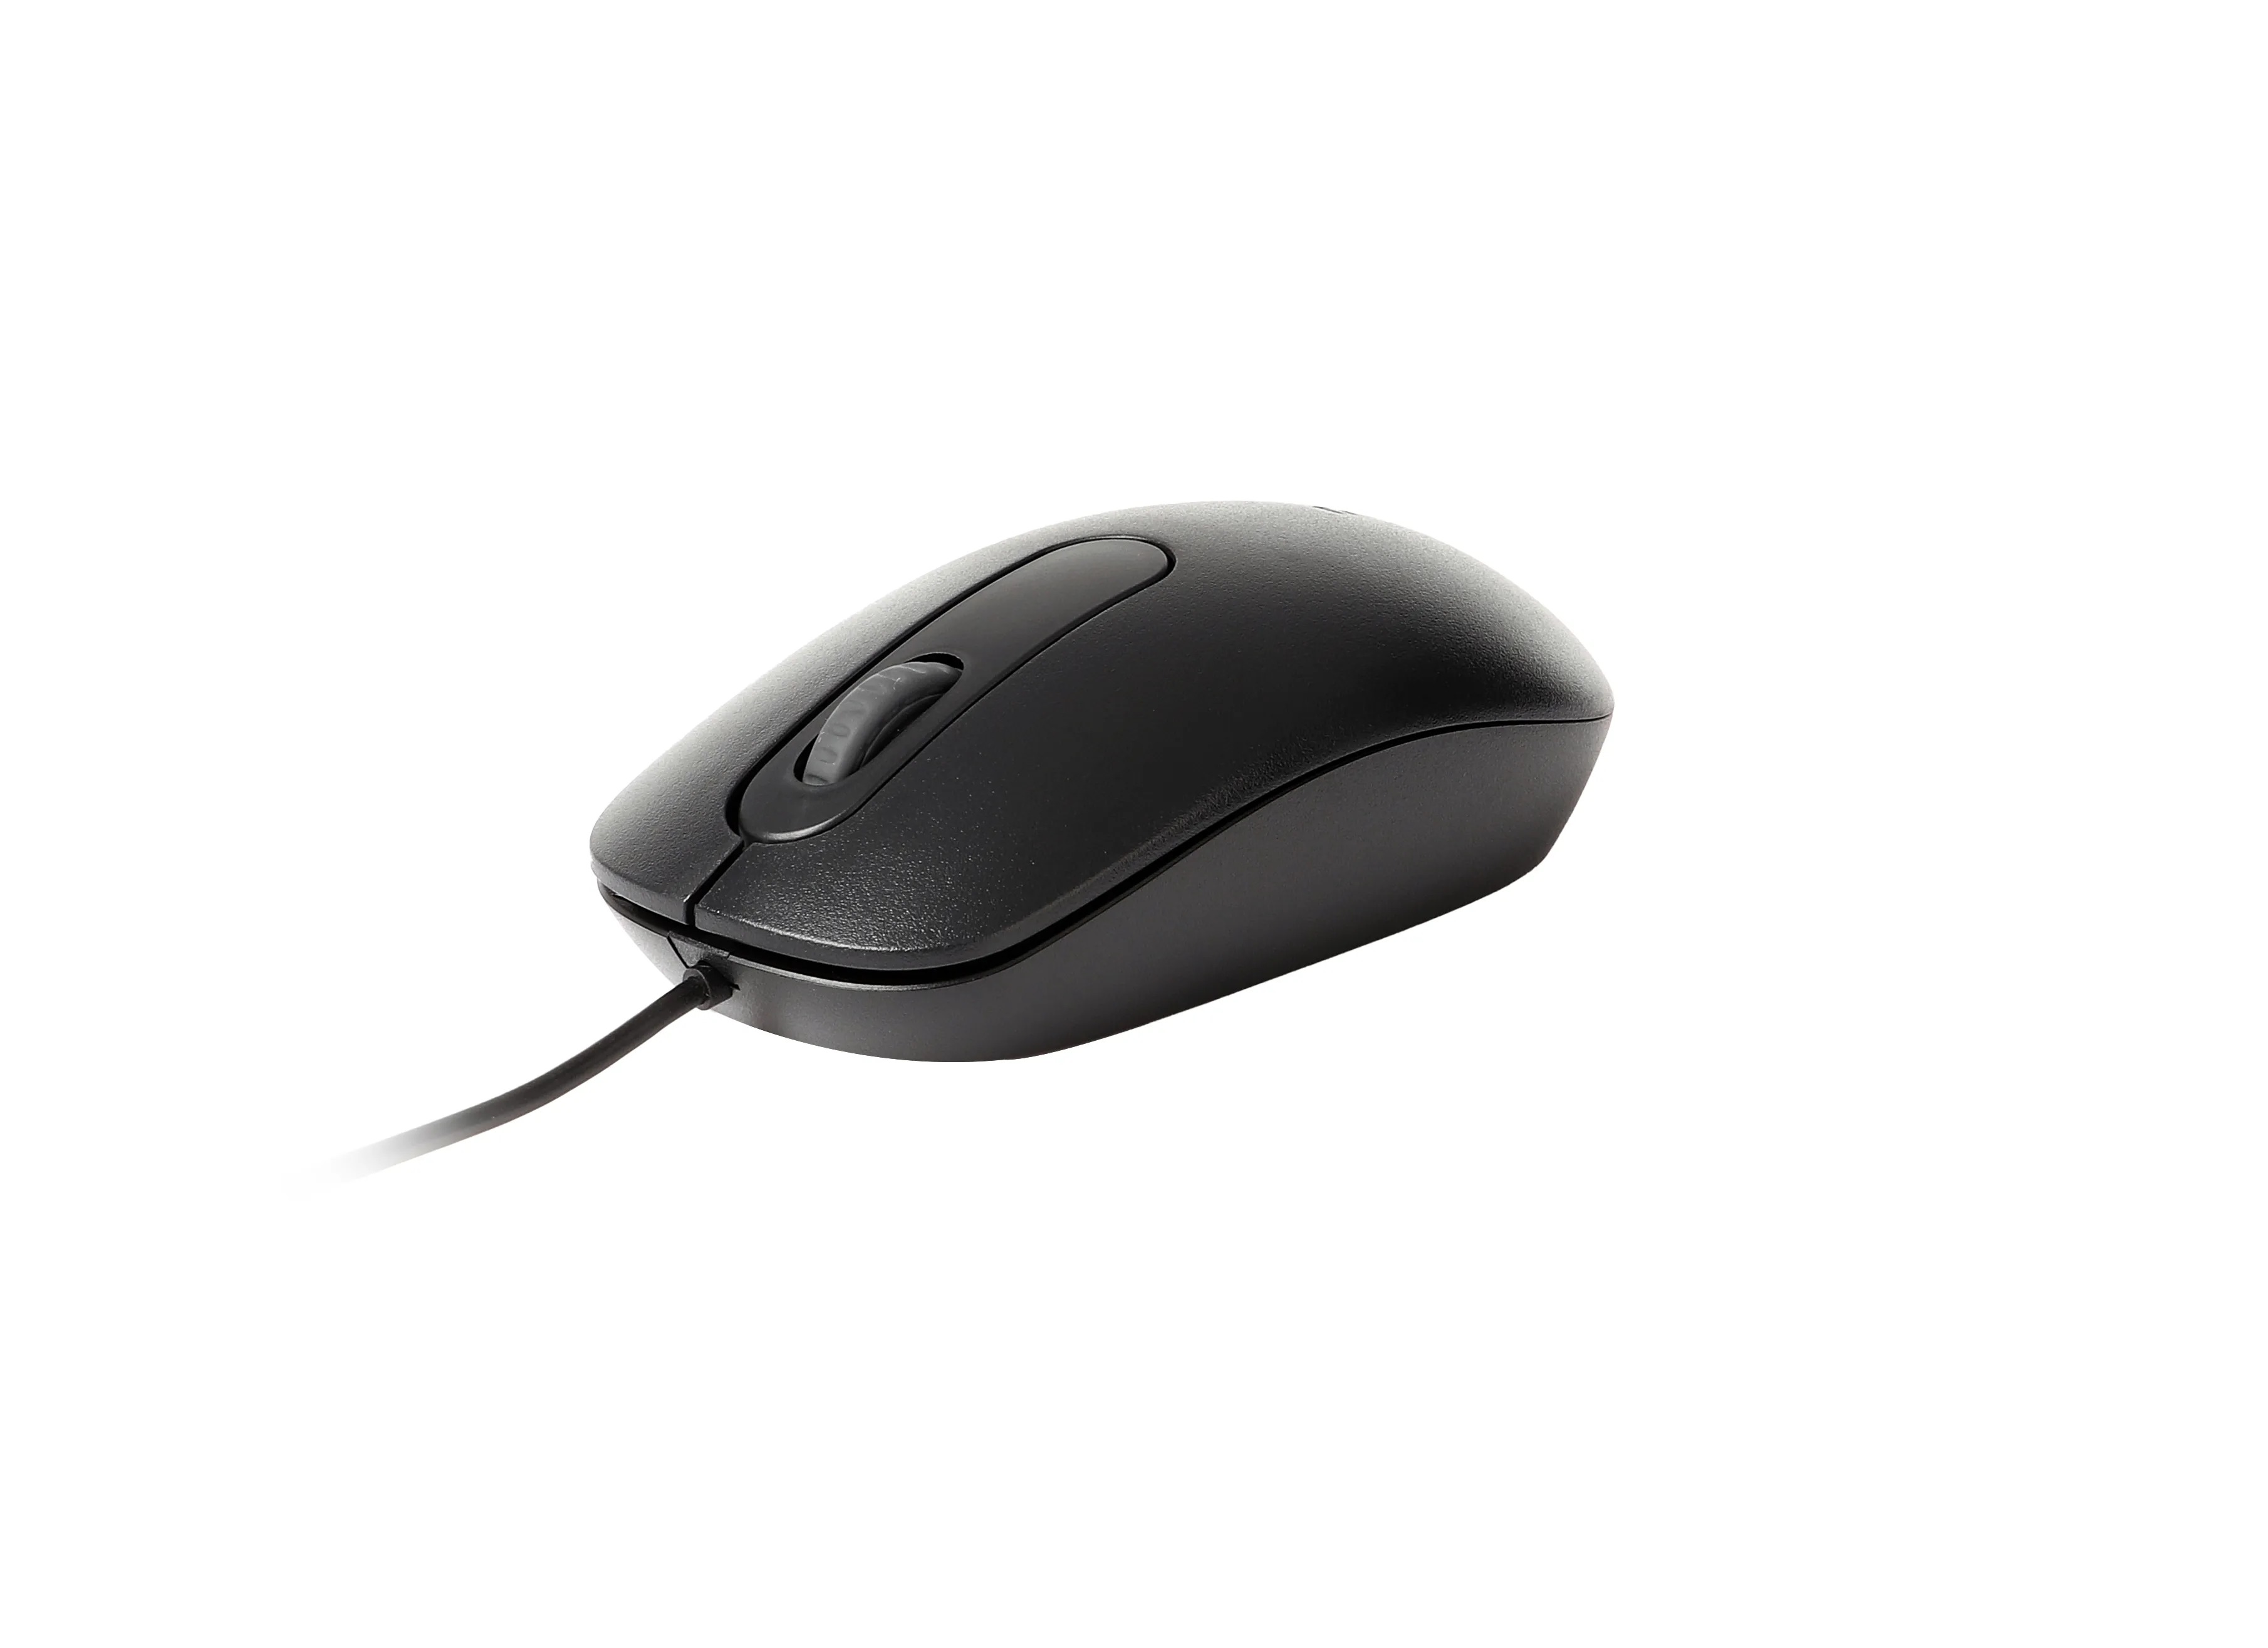 RAPOO N200 WIRED OPTICAL MOUSE BLACK - 18548